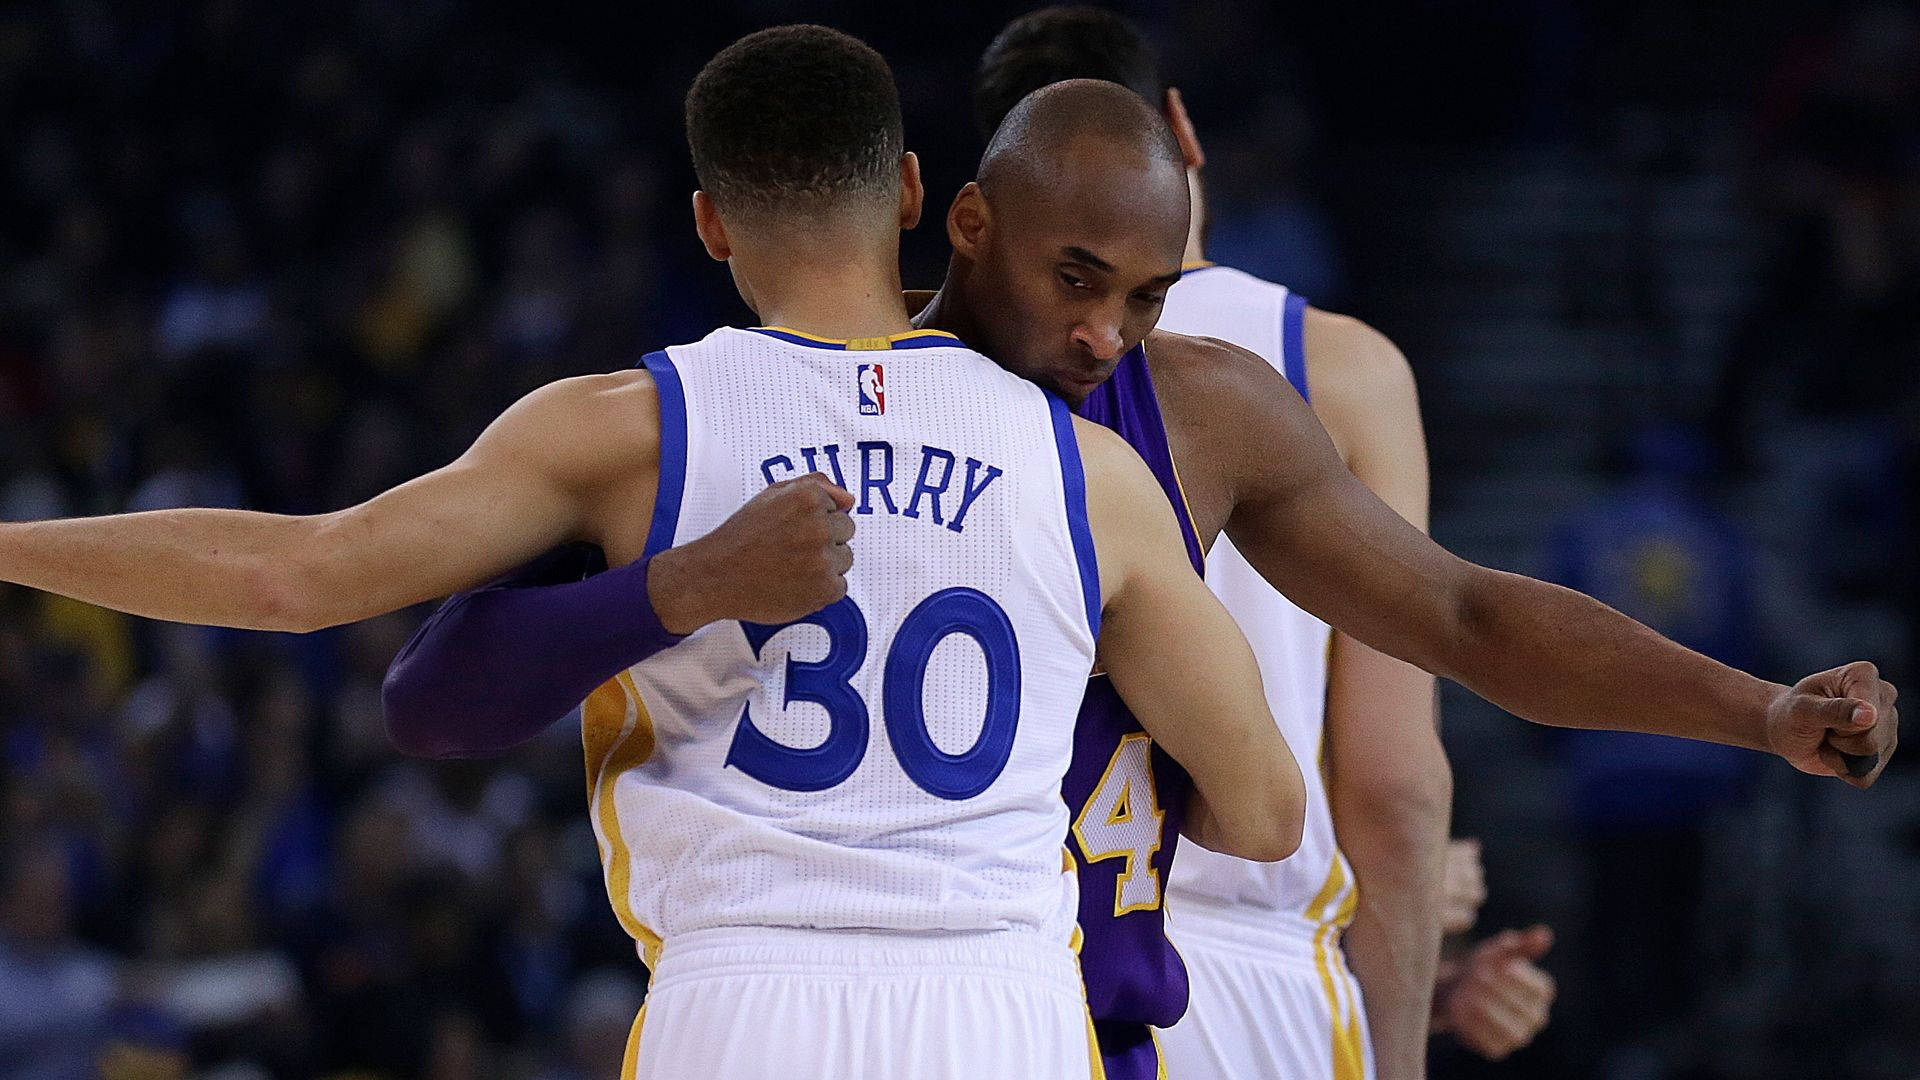 Kobe Bryant (left) And Stephen Curry (right), Legendary Basketball Players Background